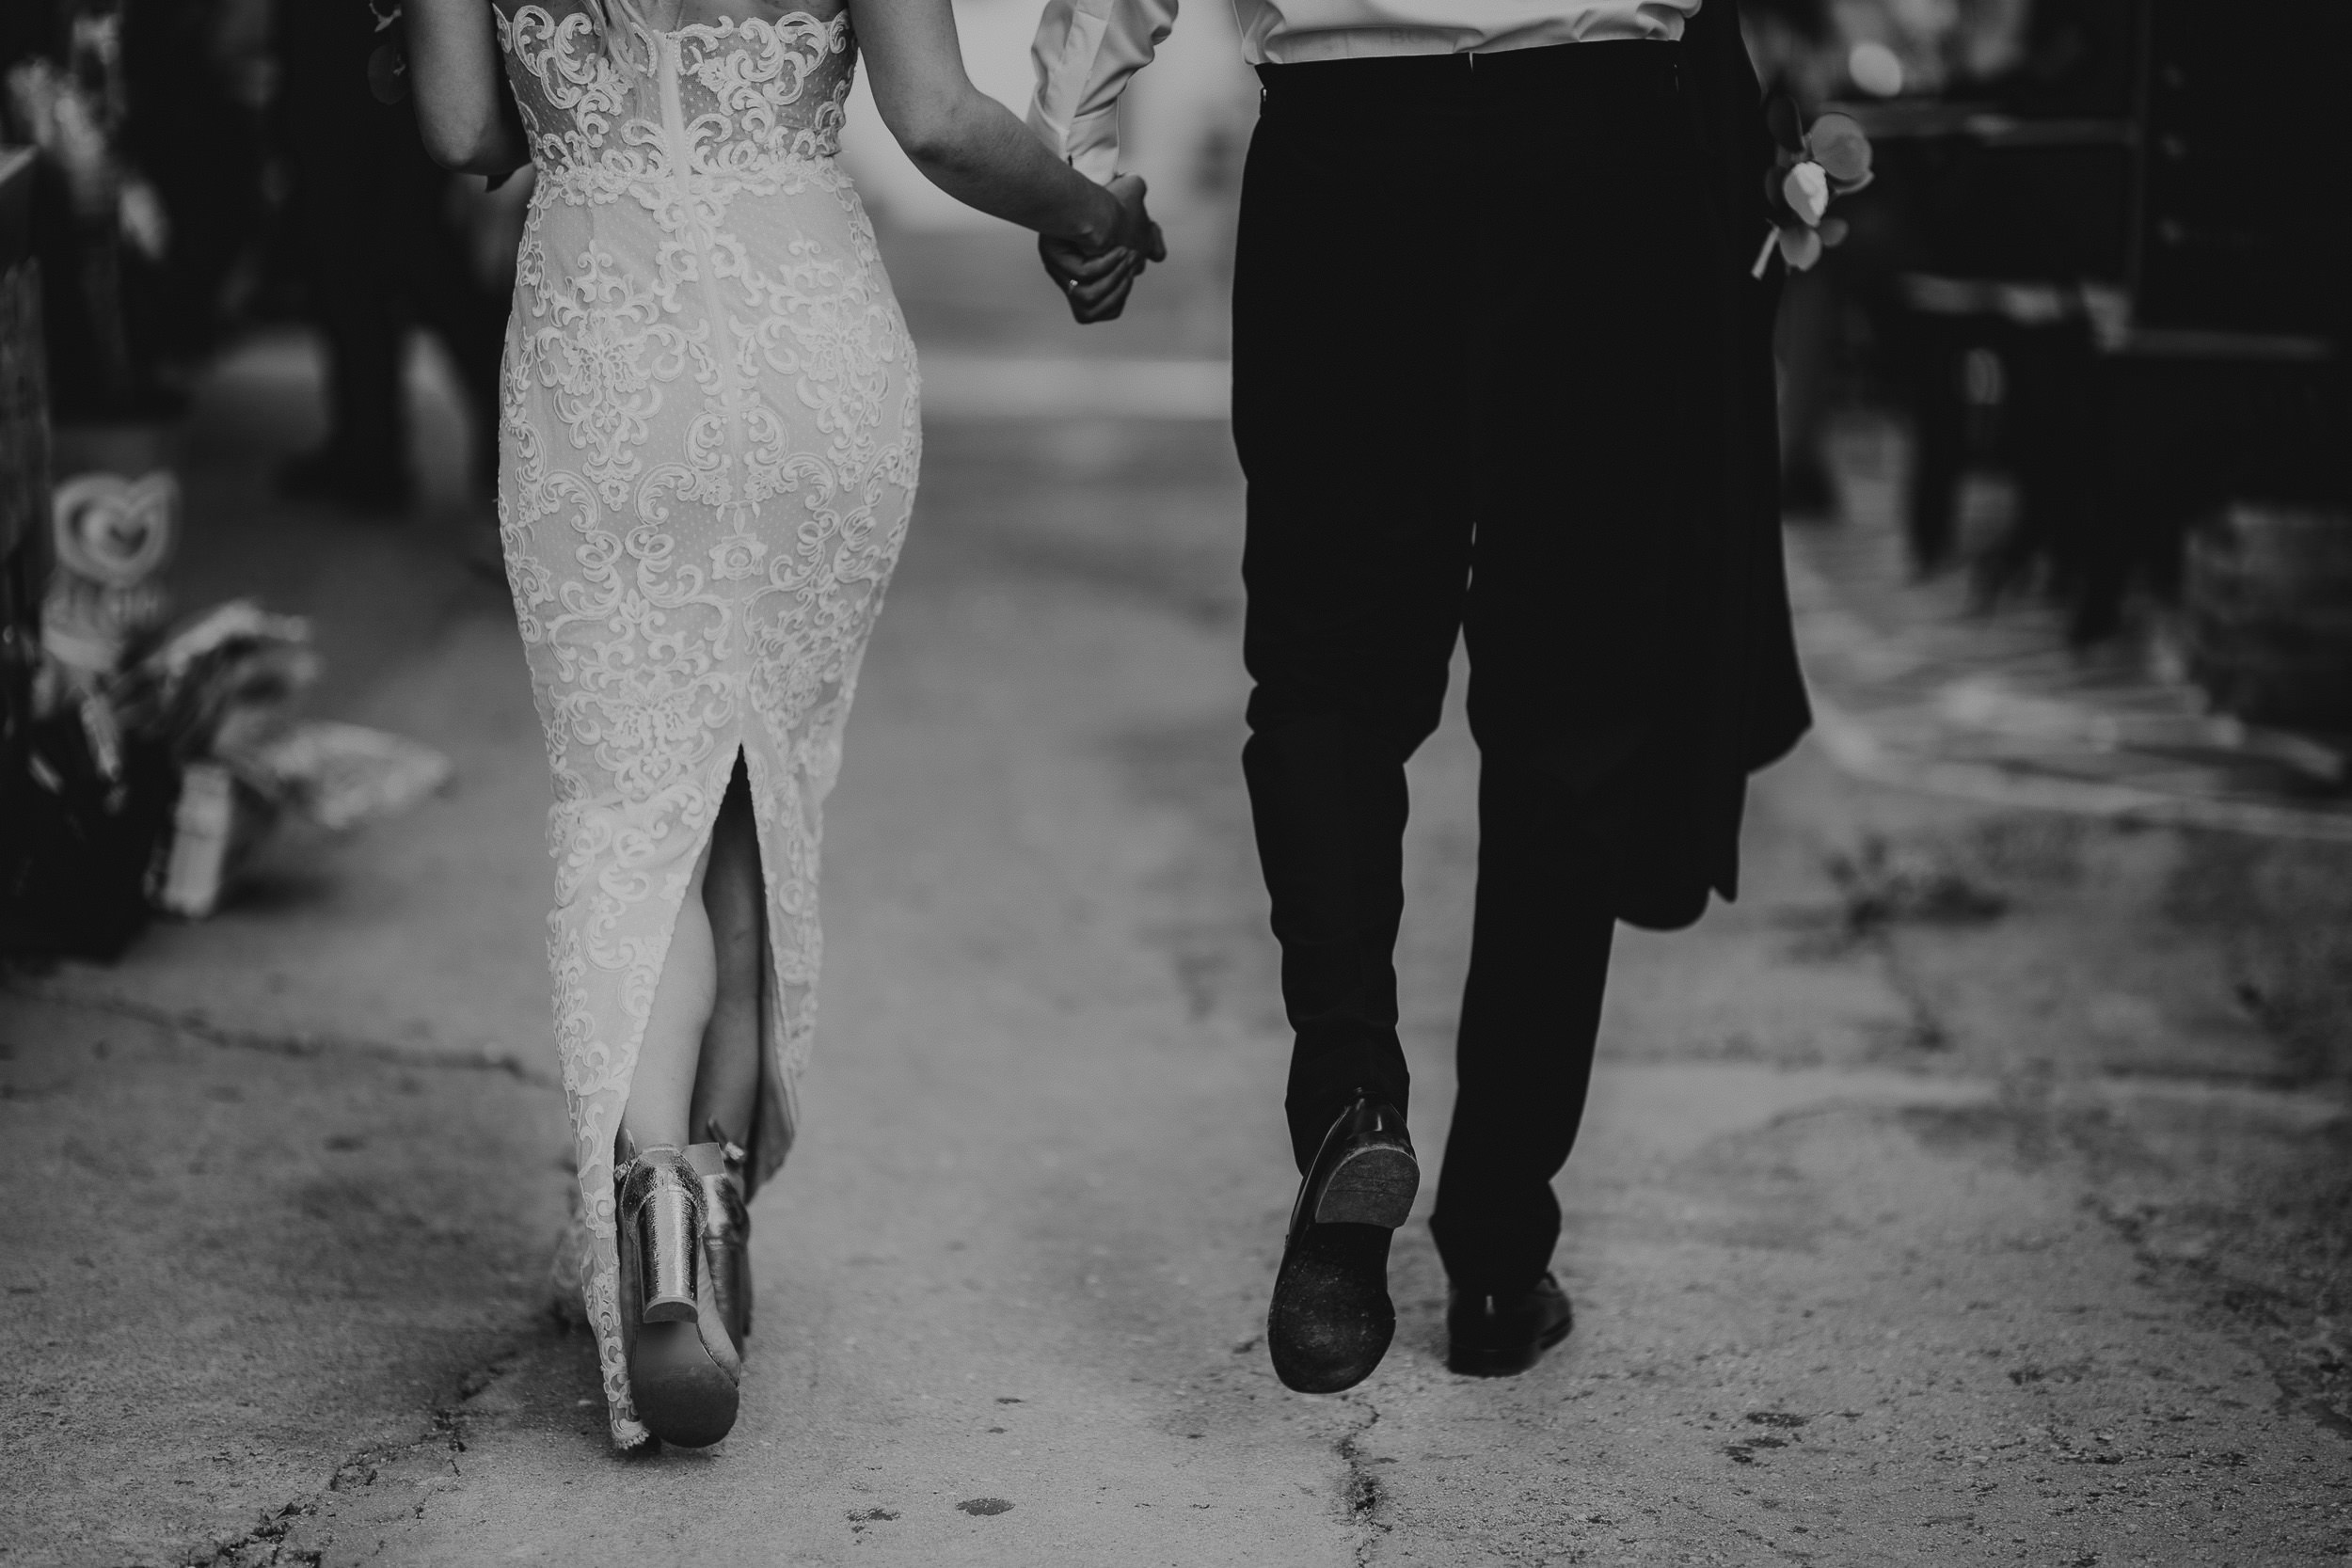 Wedding photographer captures stunning black and white portrait of a bride and groom strolling down the street.